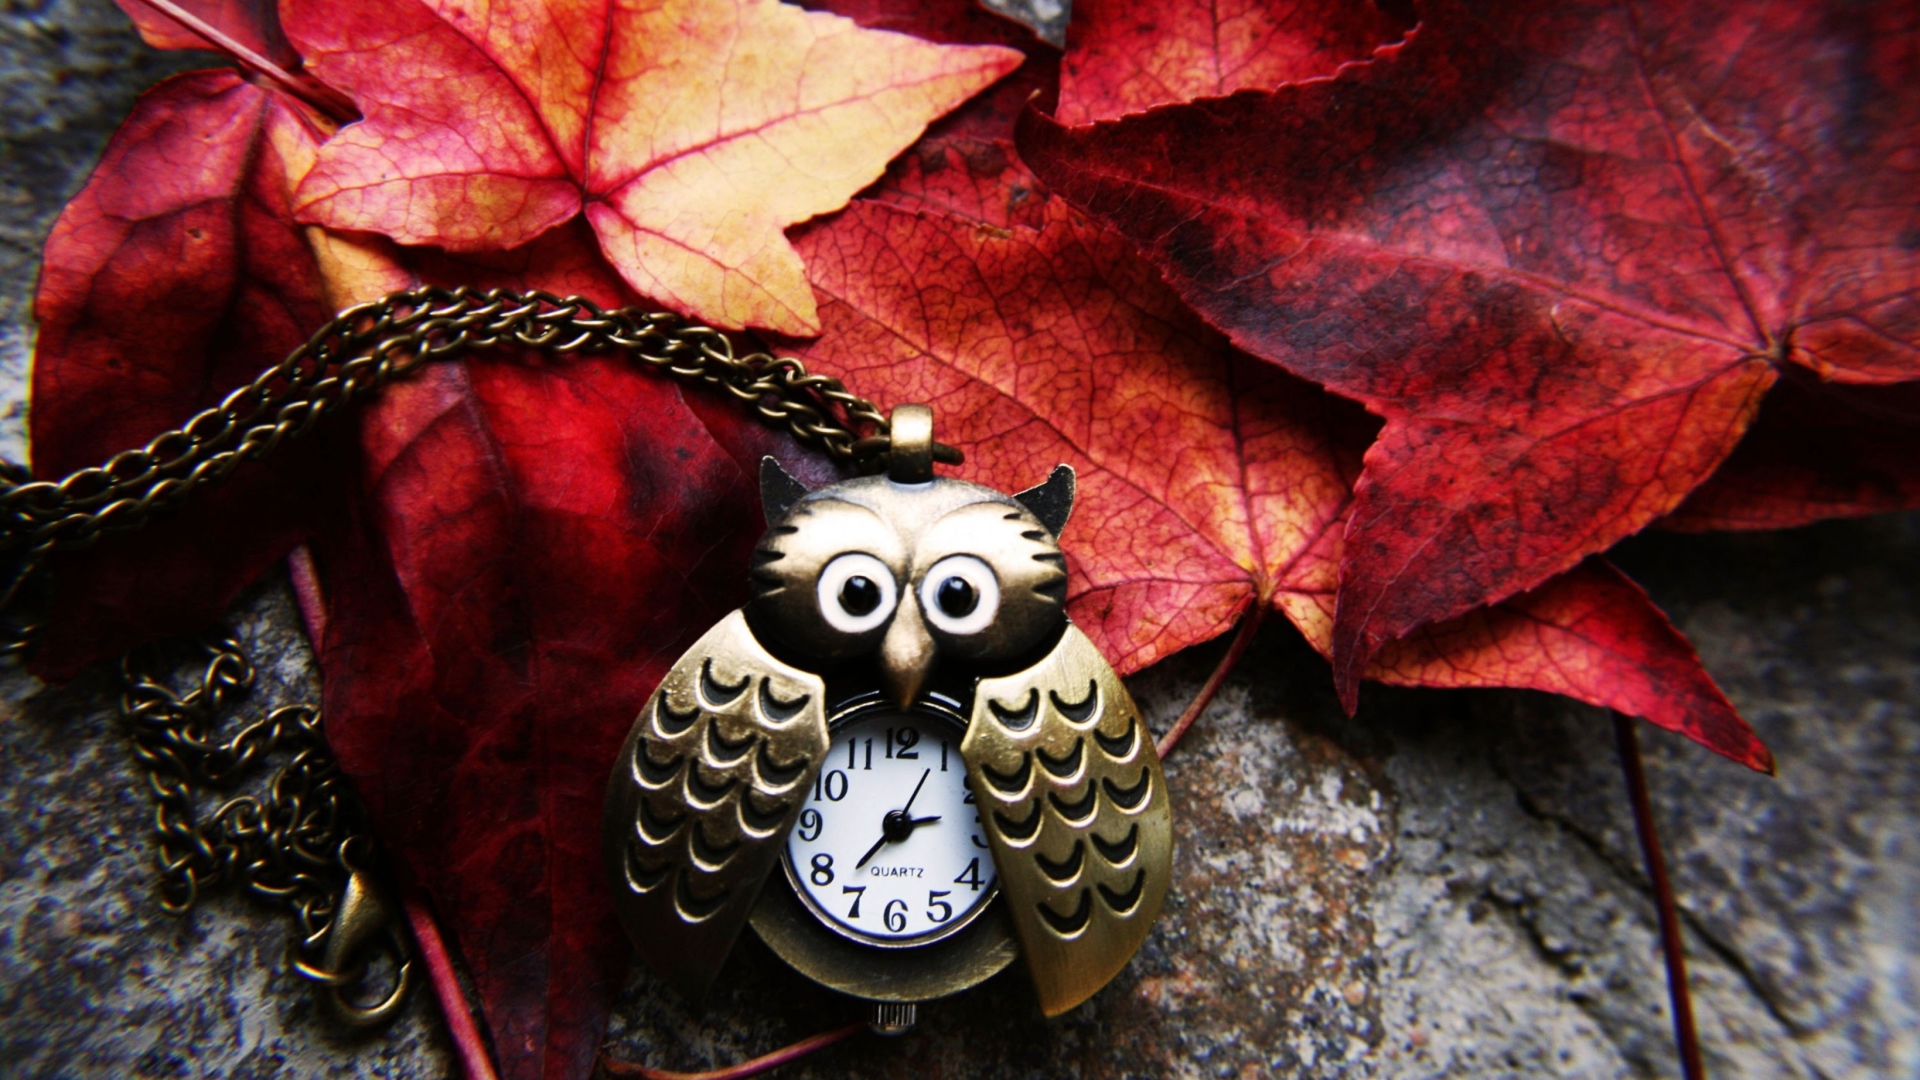 Retro Owl Watch And Autumn Leaves wallpaper 1920x1080